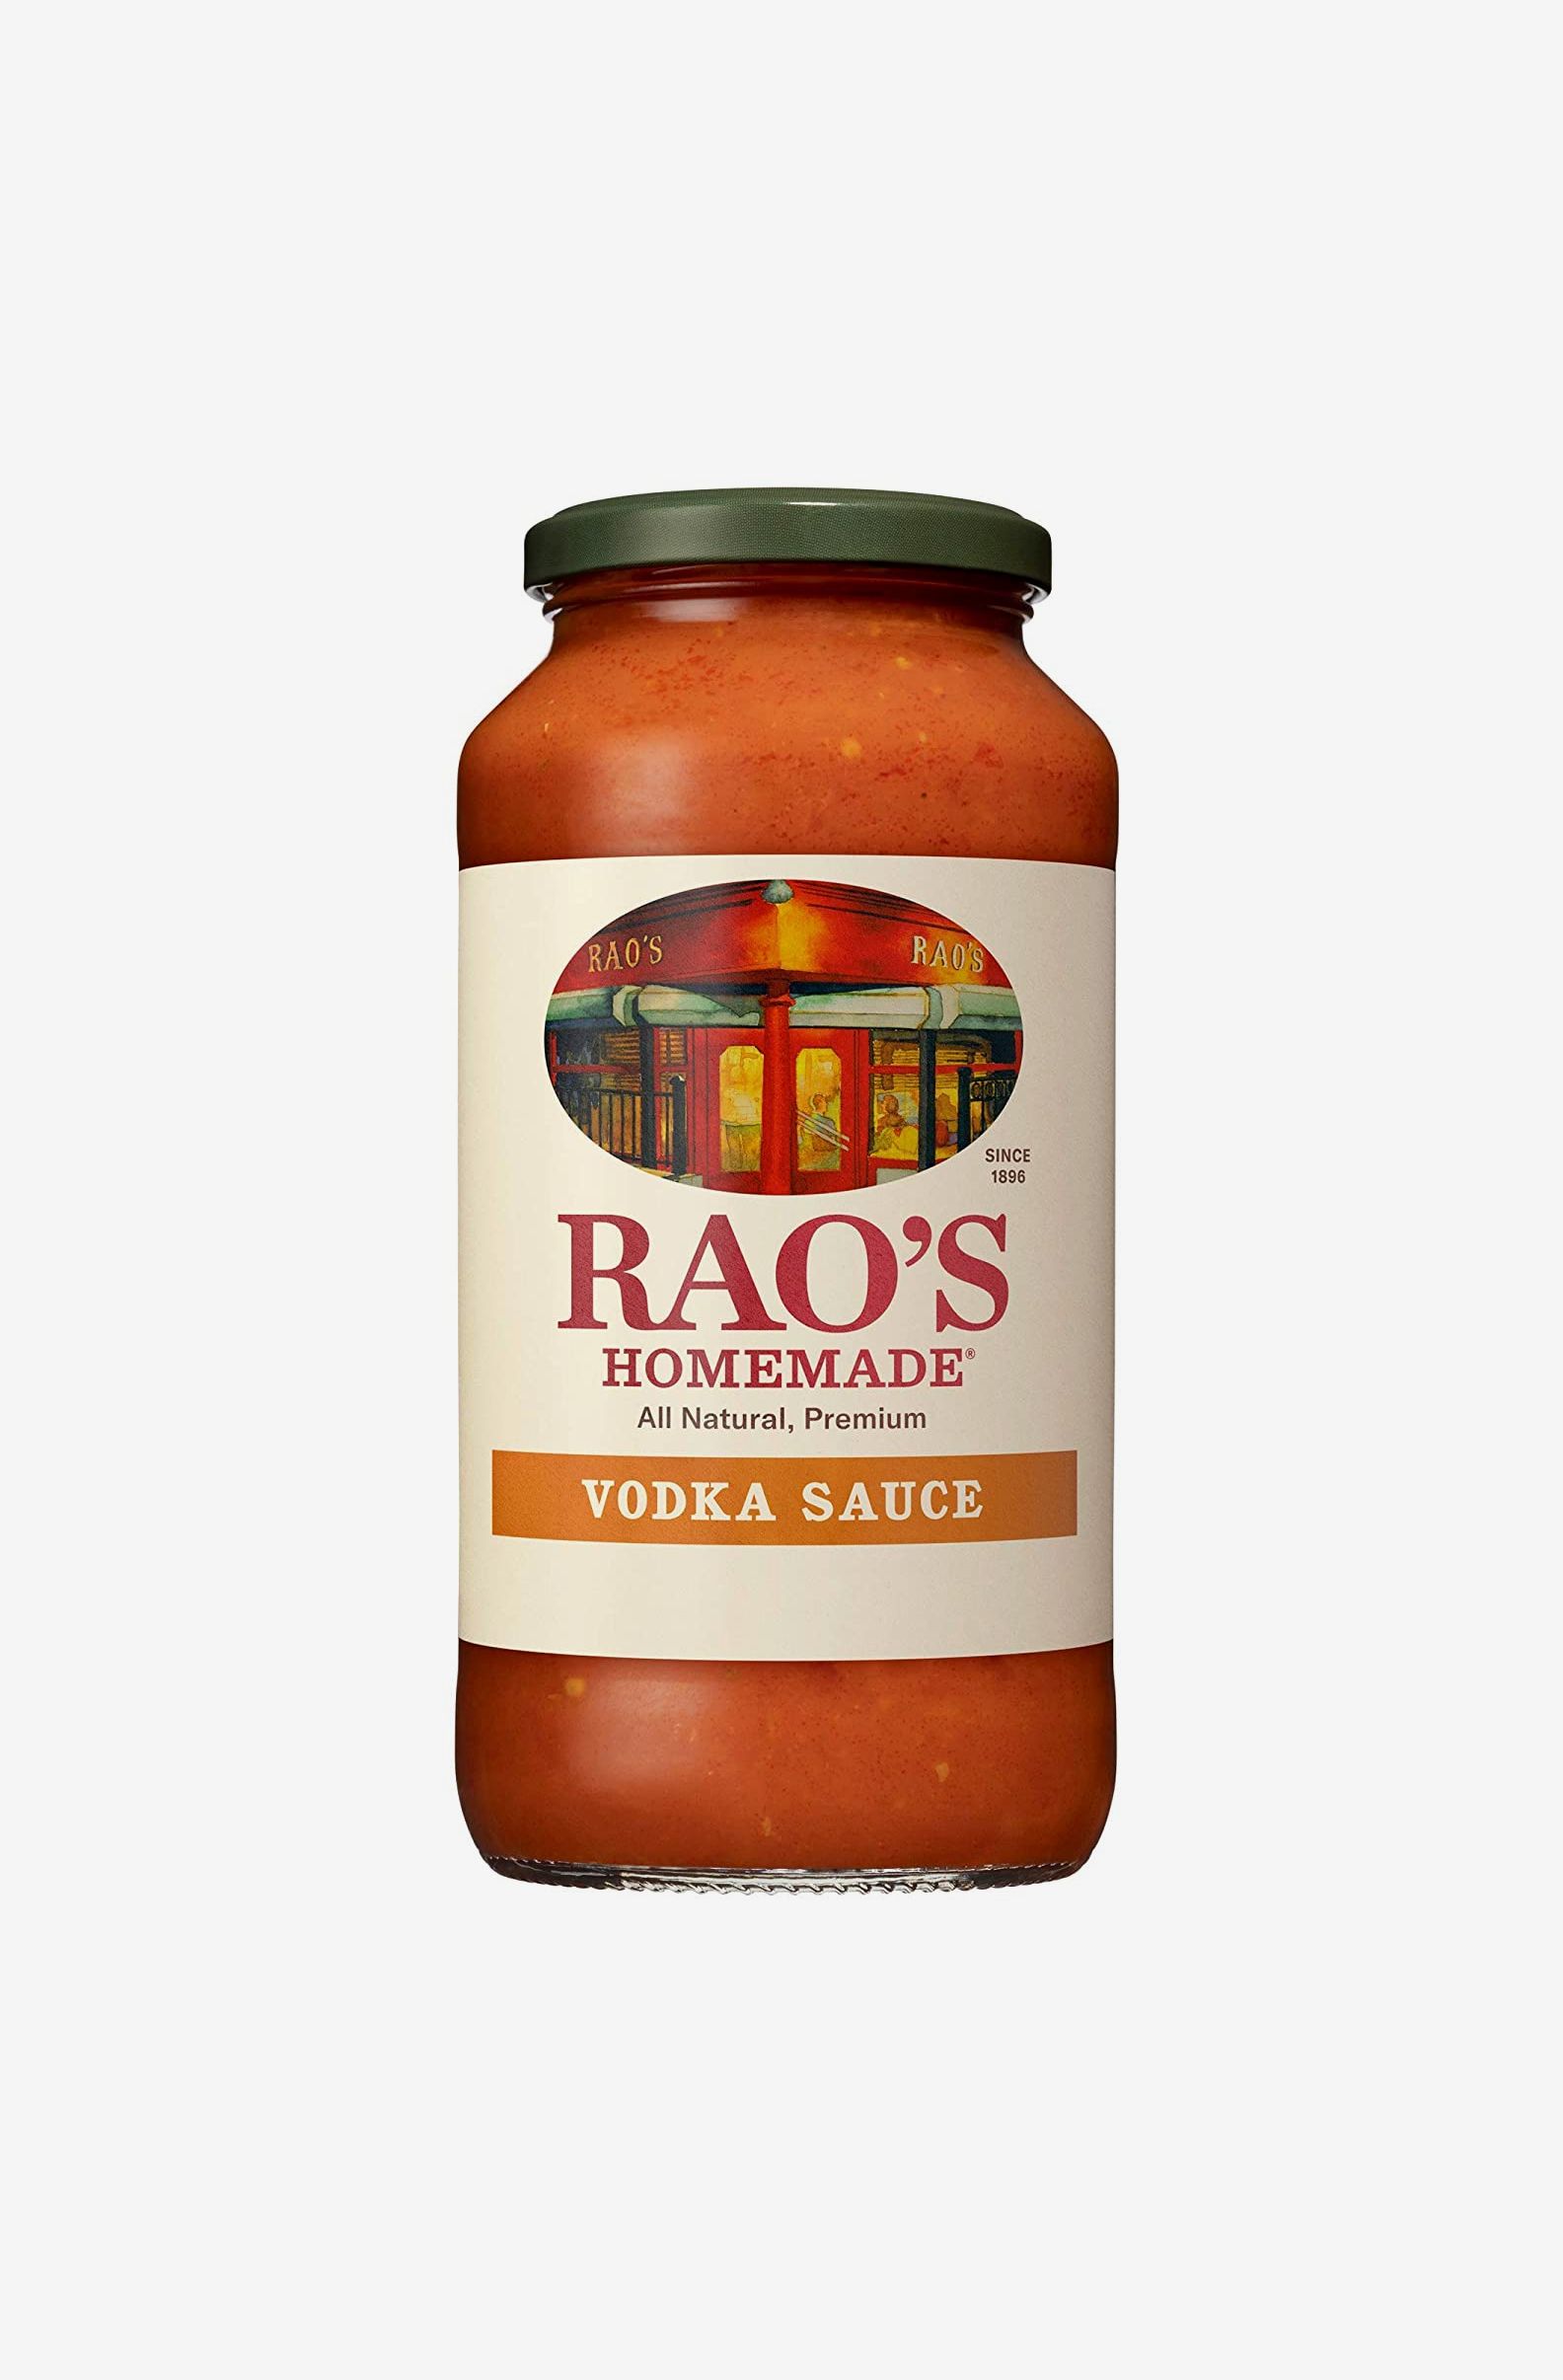 11 Best Jarred Tomato Sauces 2021 | The Strategist